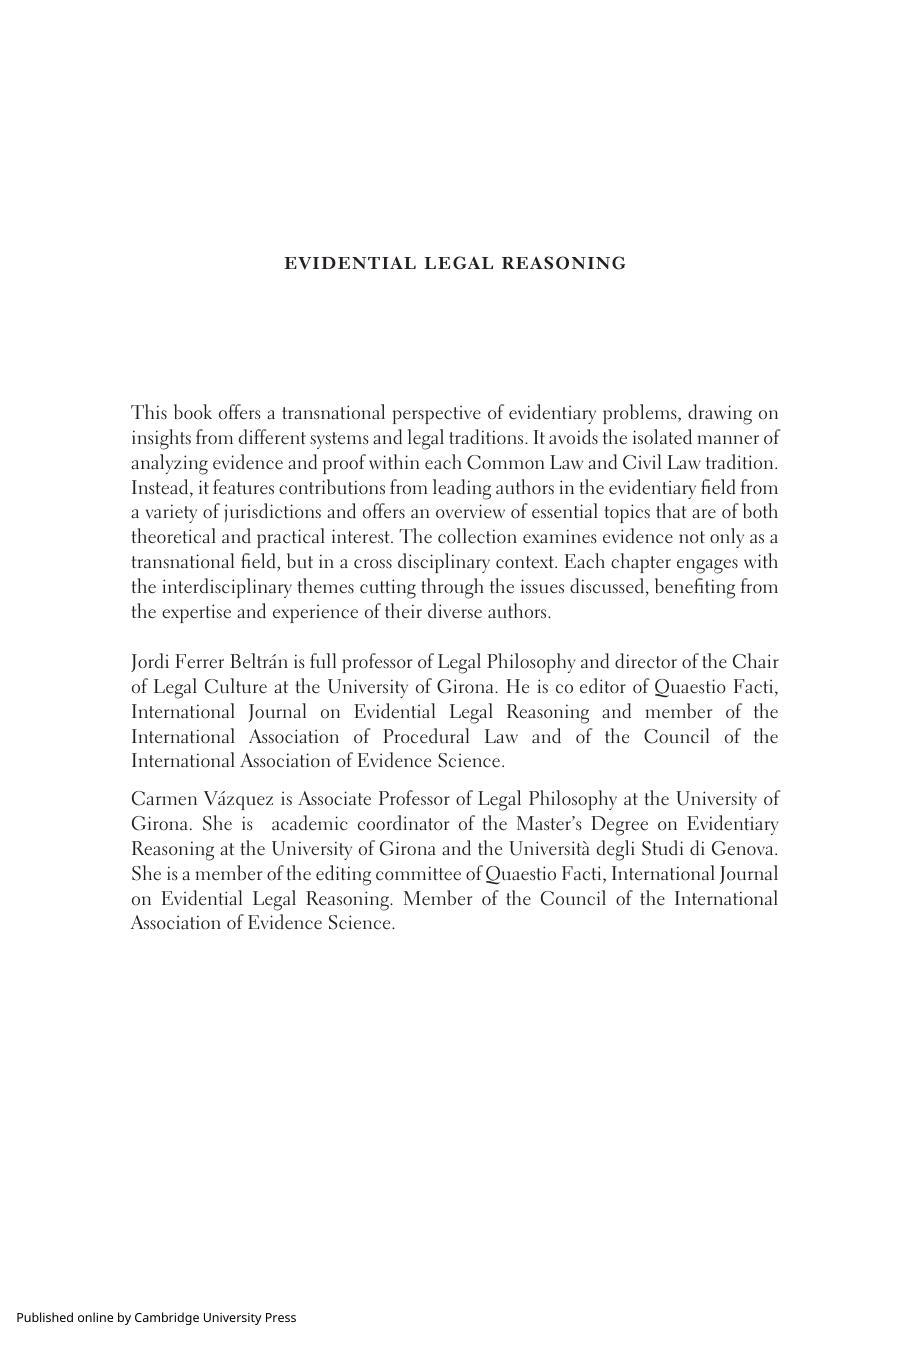 Evidential Legal Reasoning Crossing Civil Law and Common Law Traditions by Jordi Ferrer Beltrán Carmen Vázquez